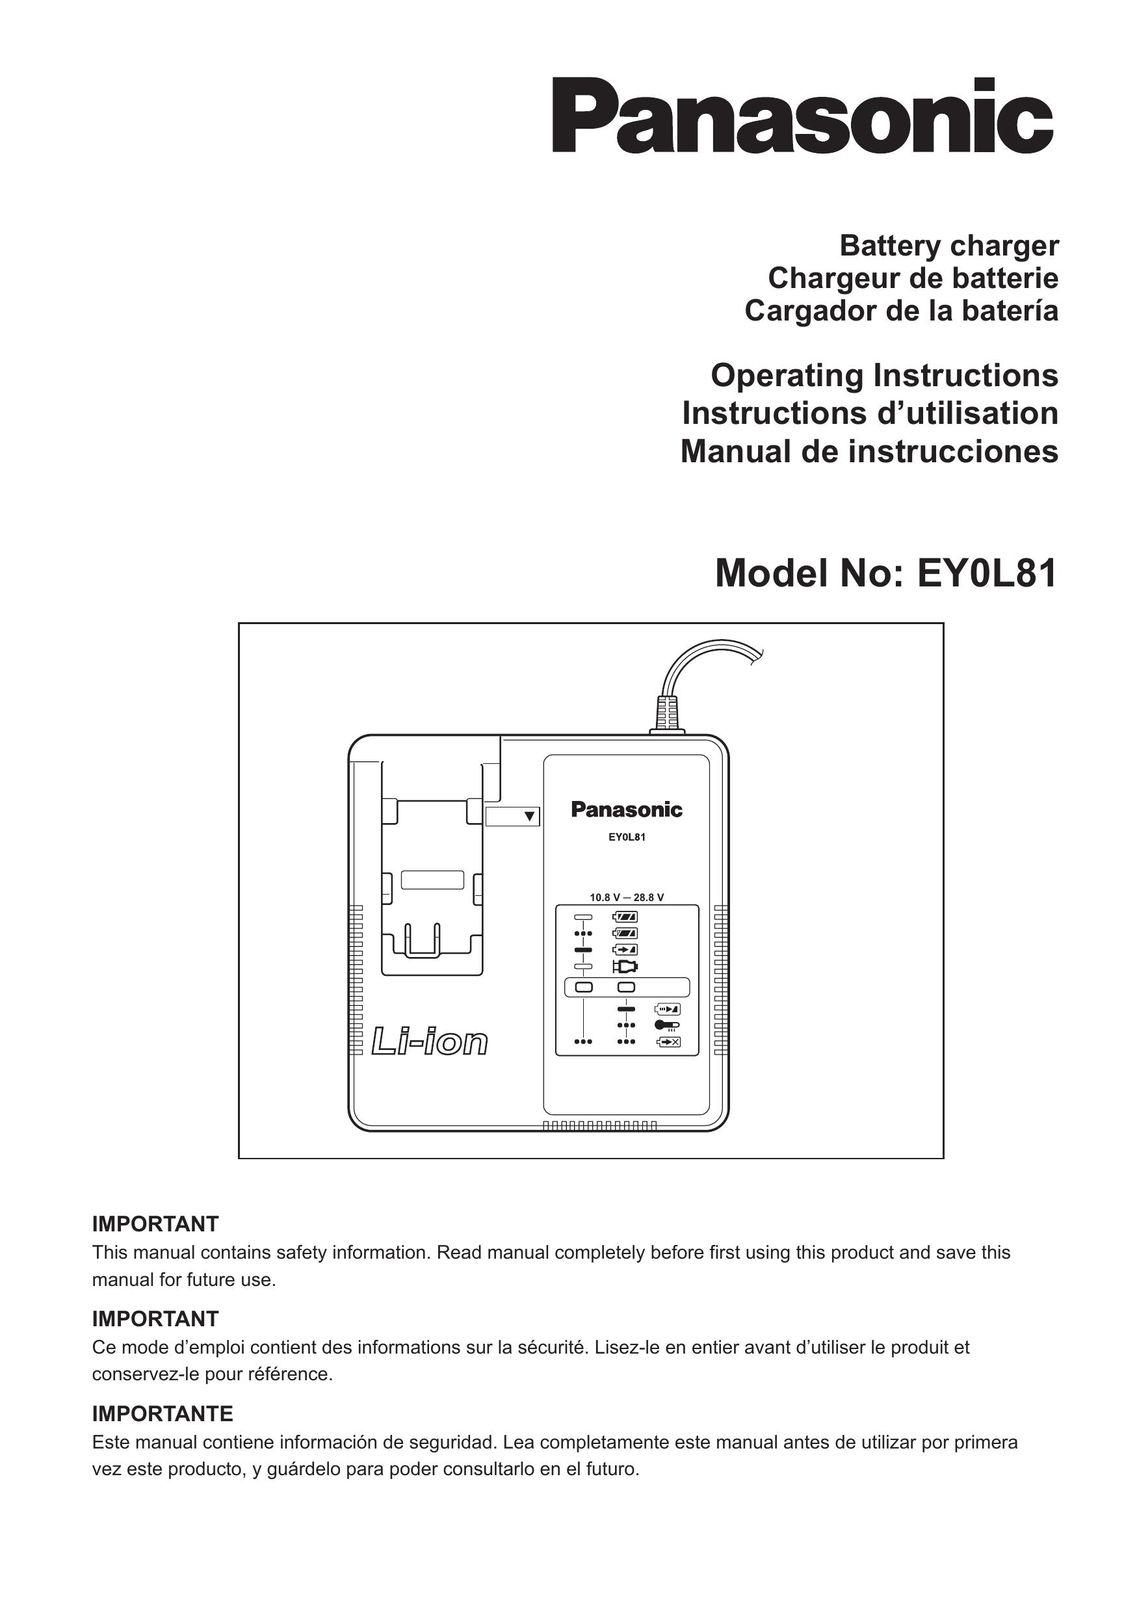 Panasonic EY0L81 Battery Charger User Manual